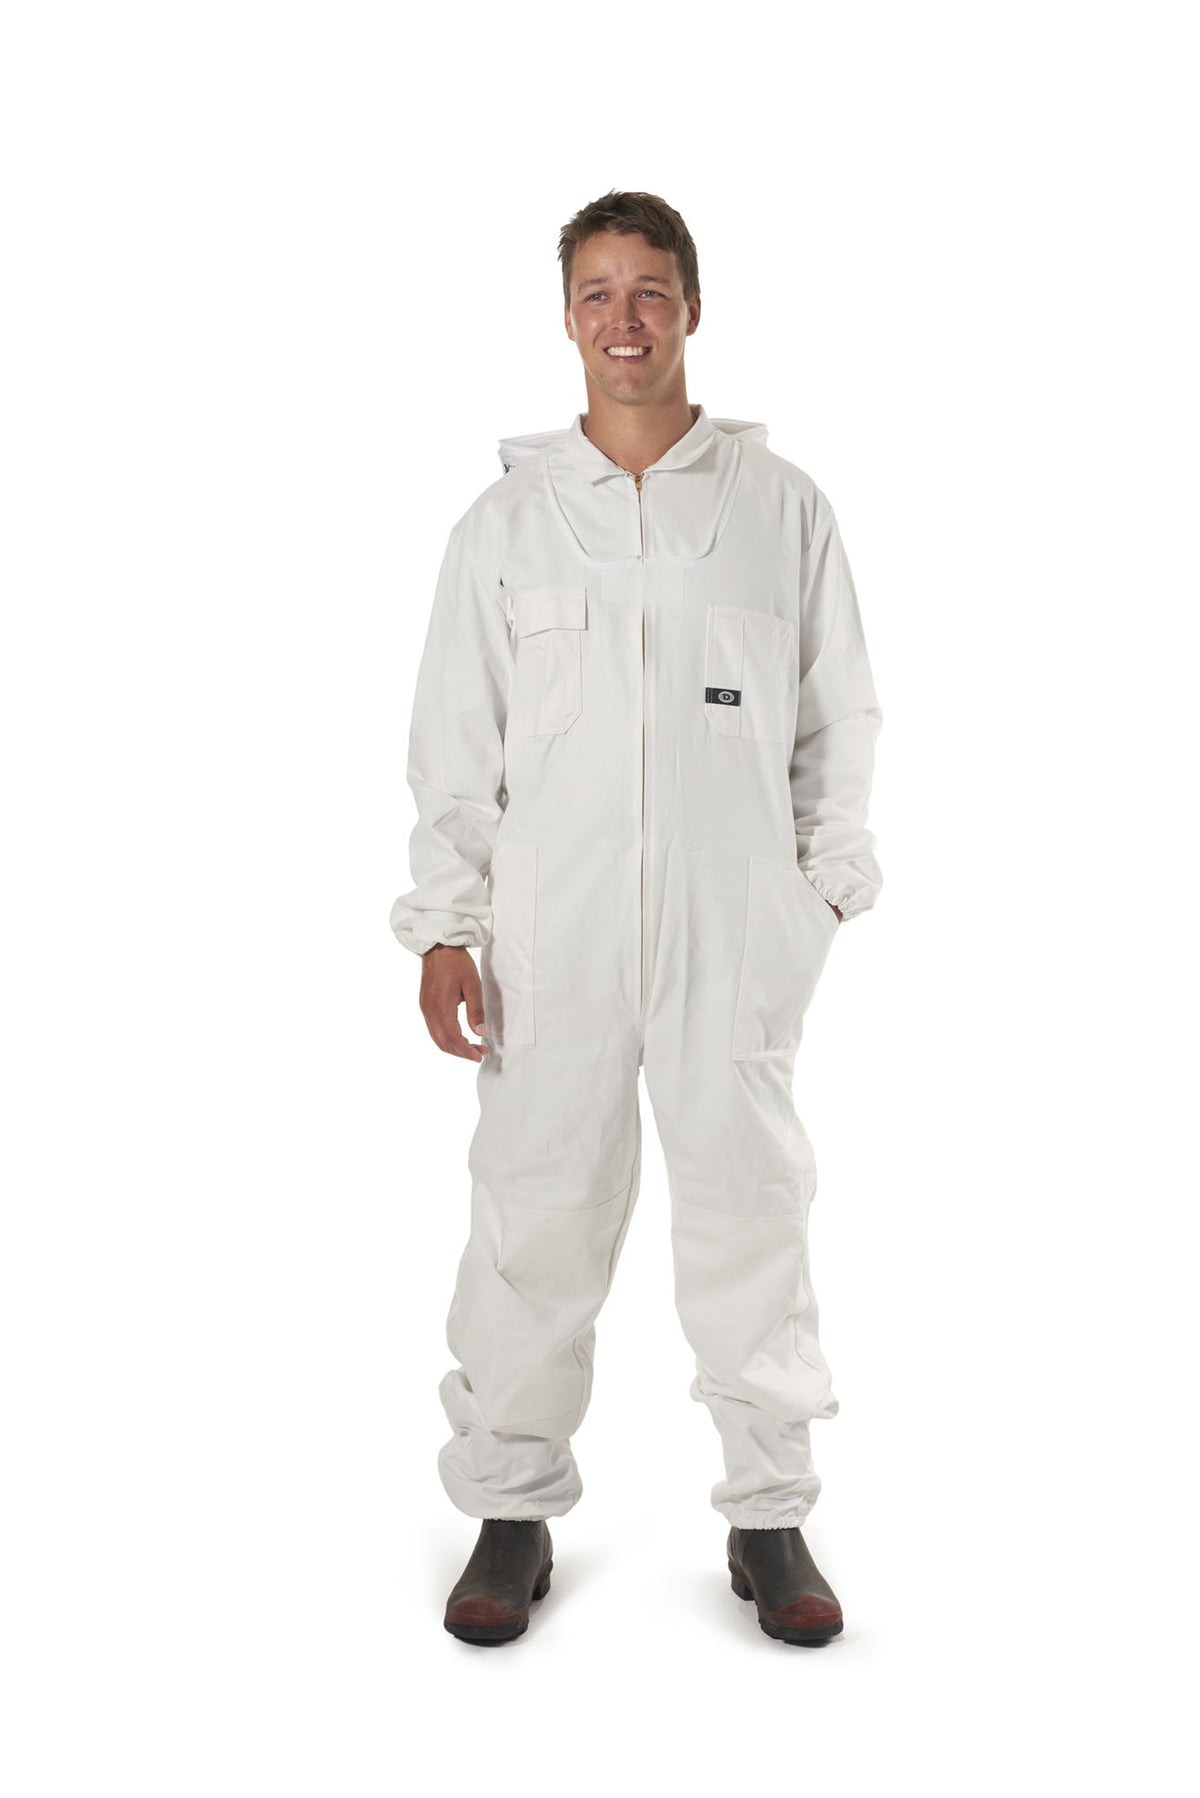 Mens Bee Suit with Folding Hood - (White) - NZ made